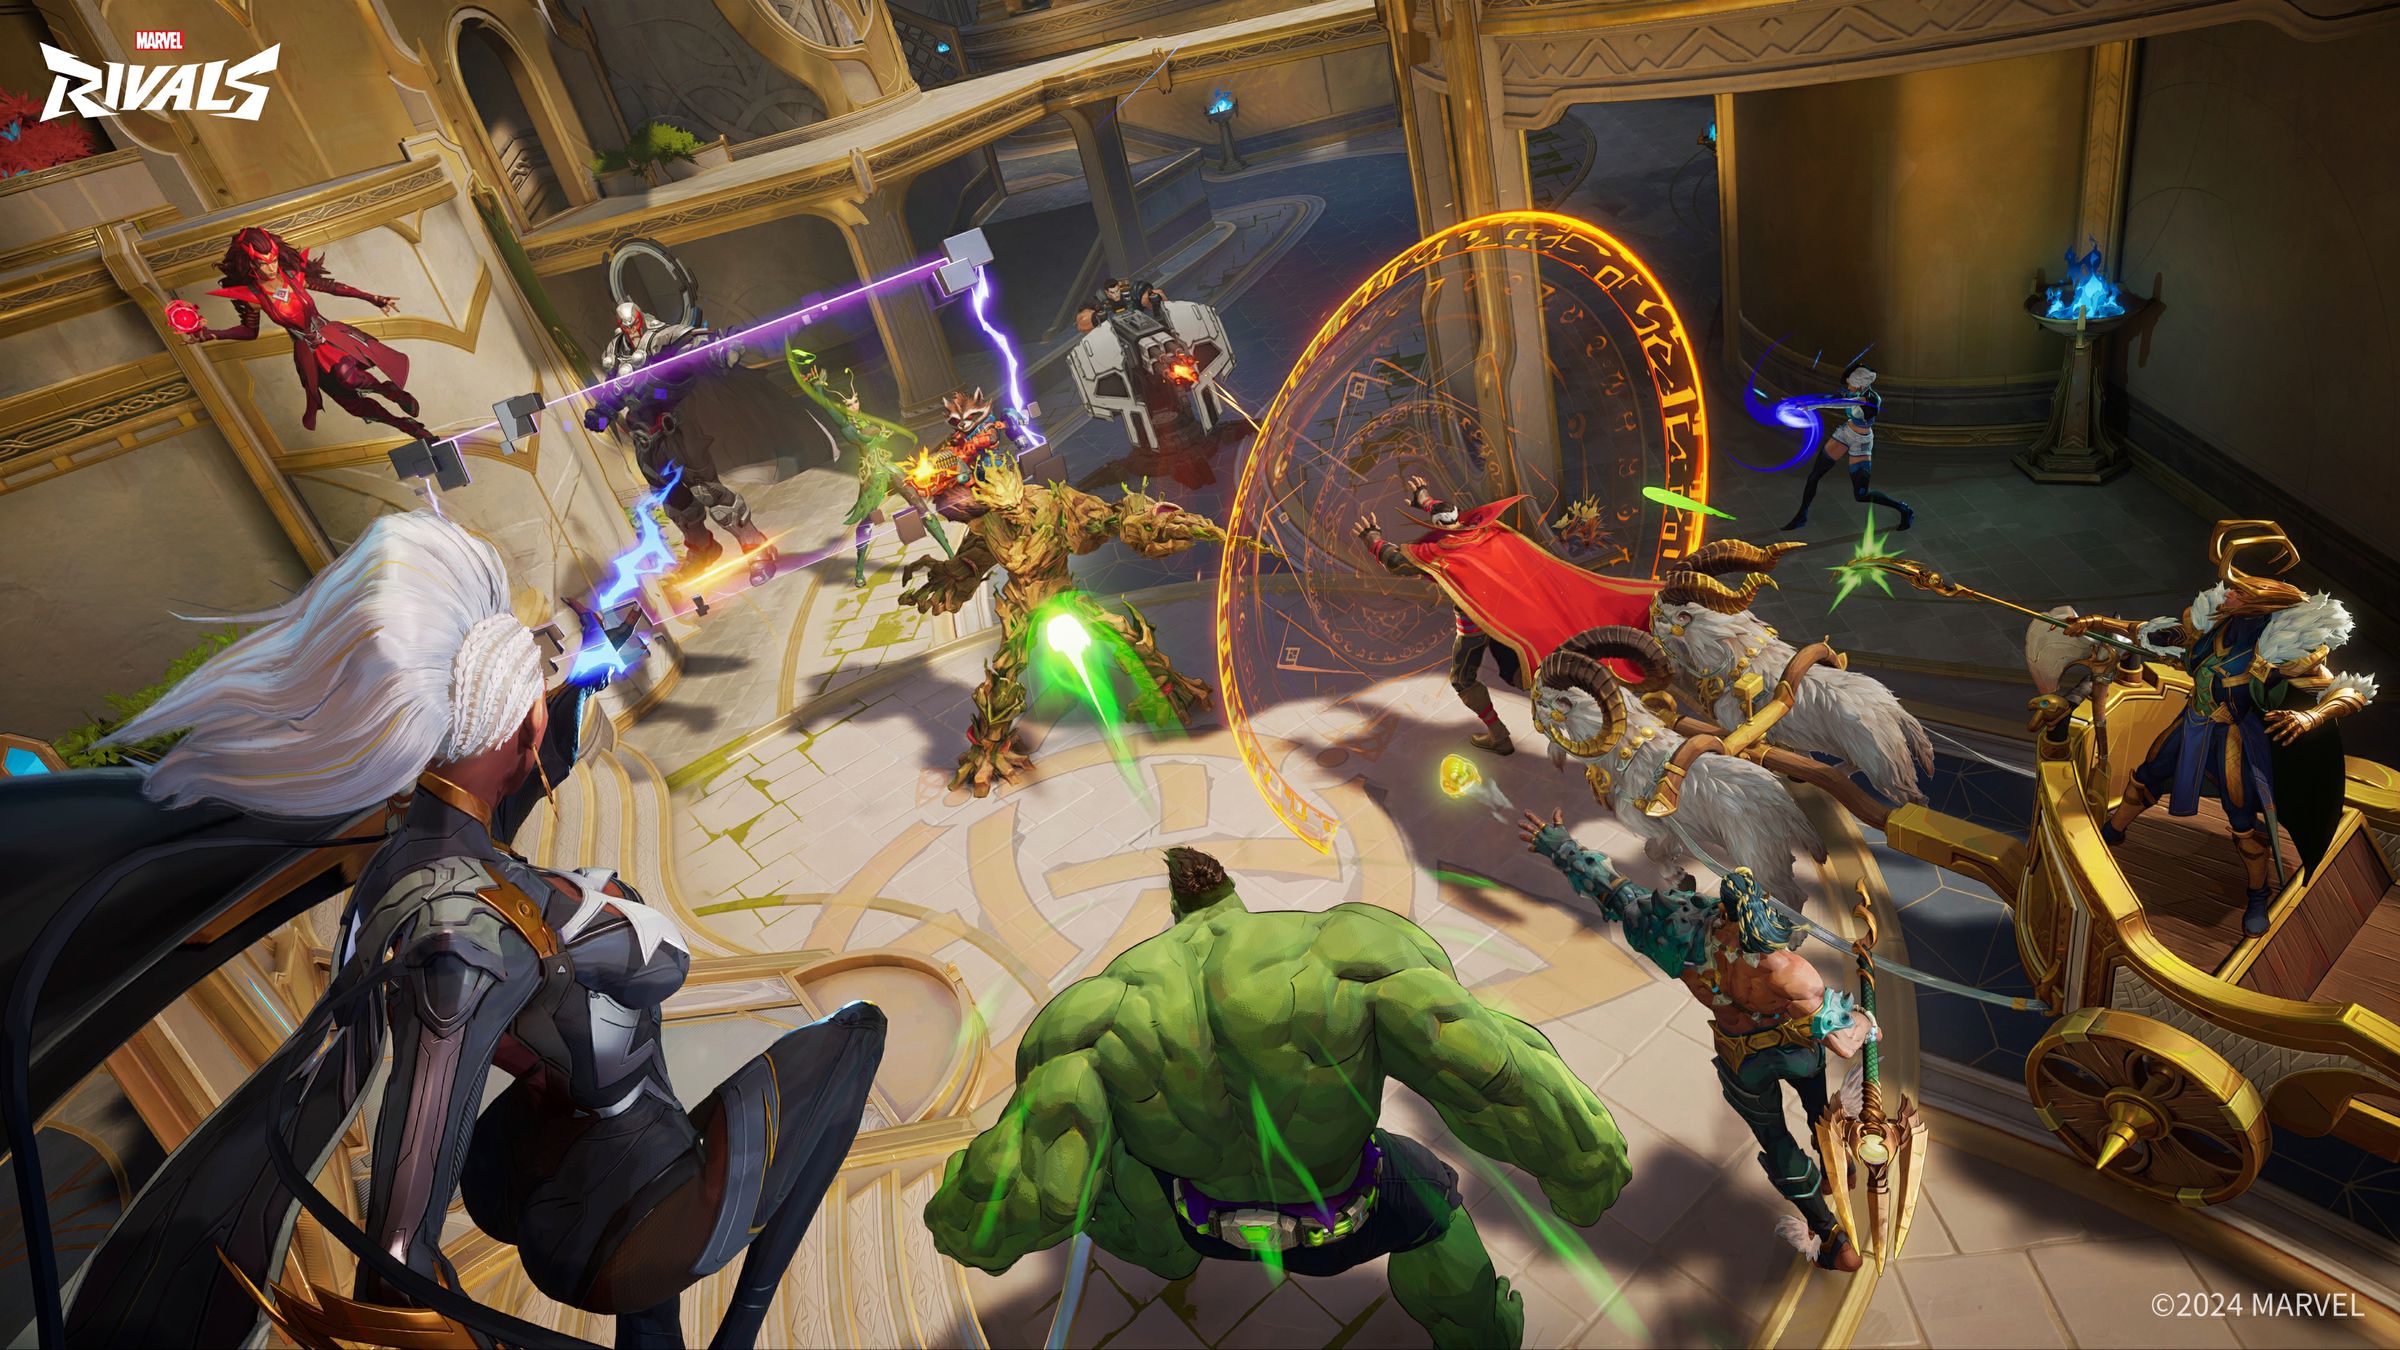 Marvel Rivals is a mix of Overwatch and superhero battles